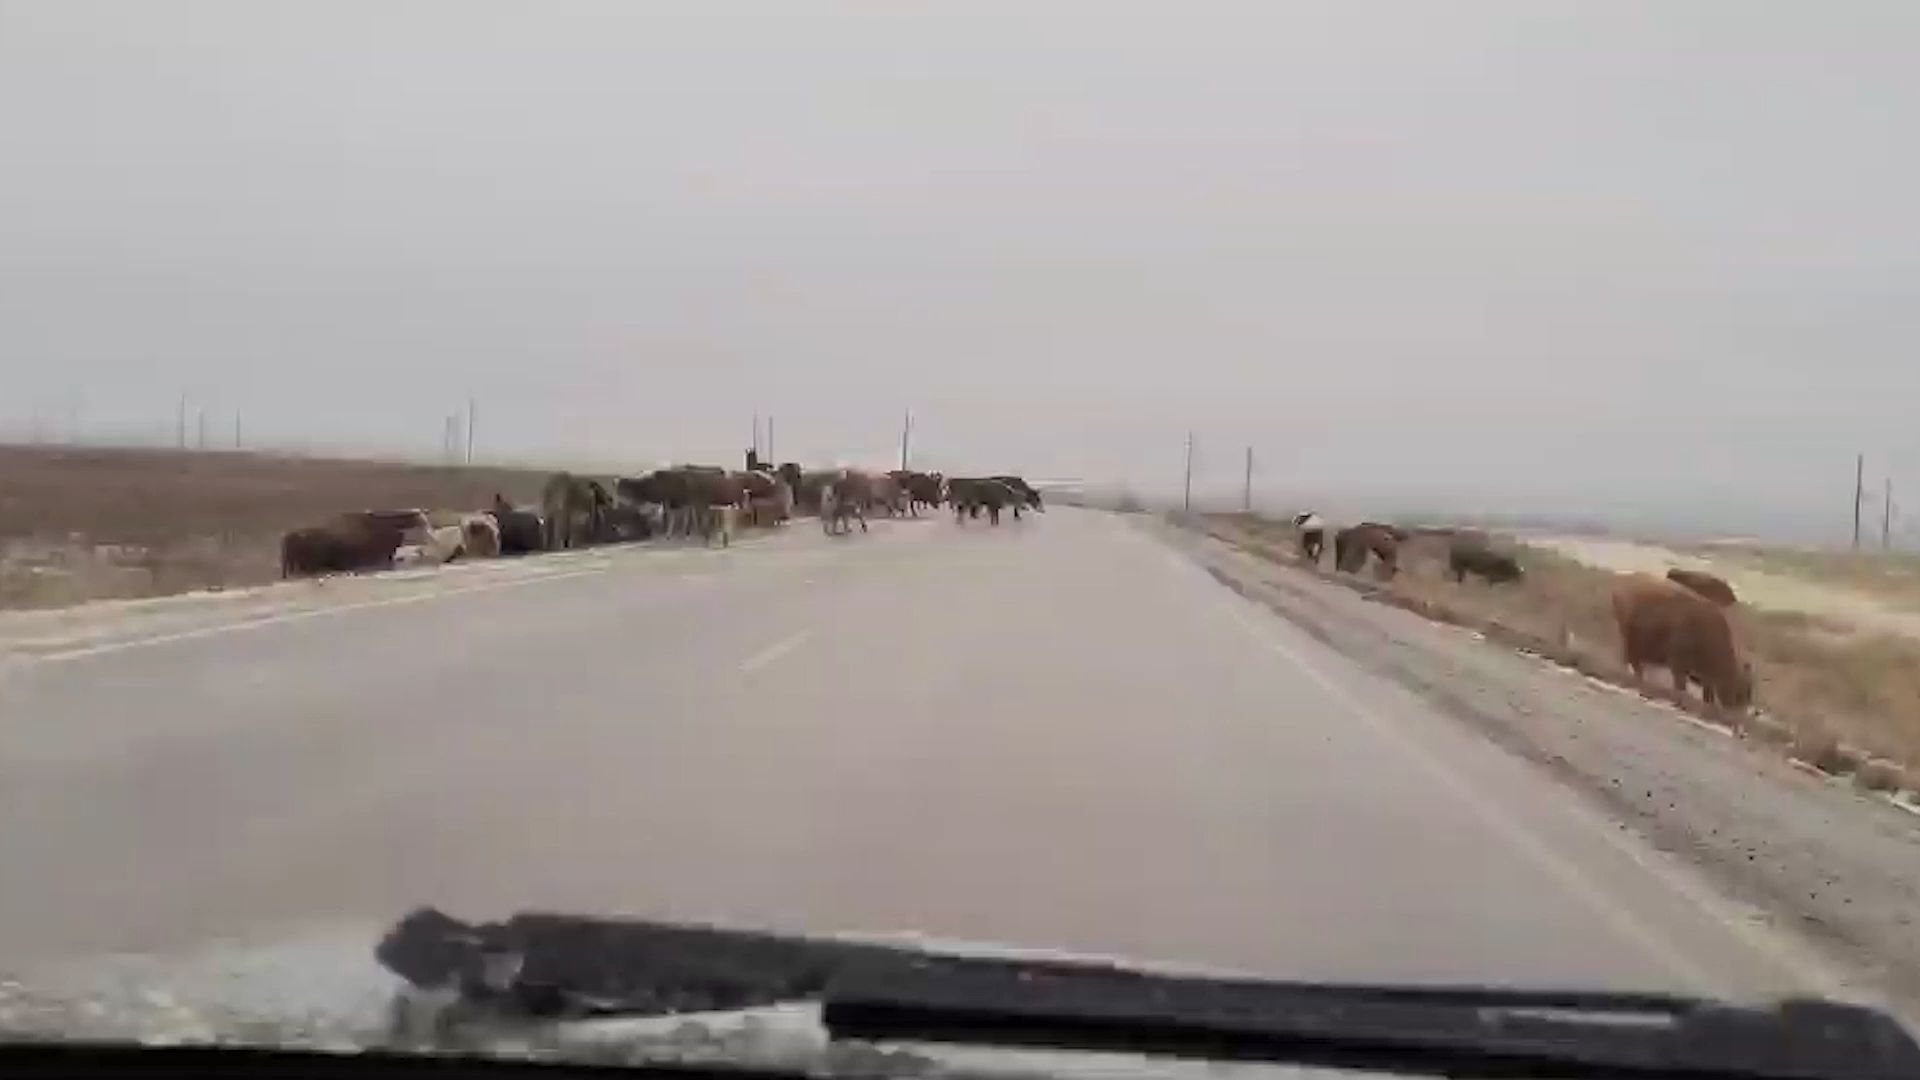 Slippery business: cows cross an icy country road